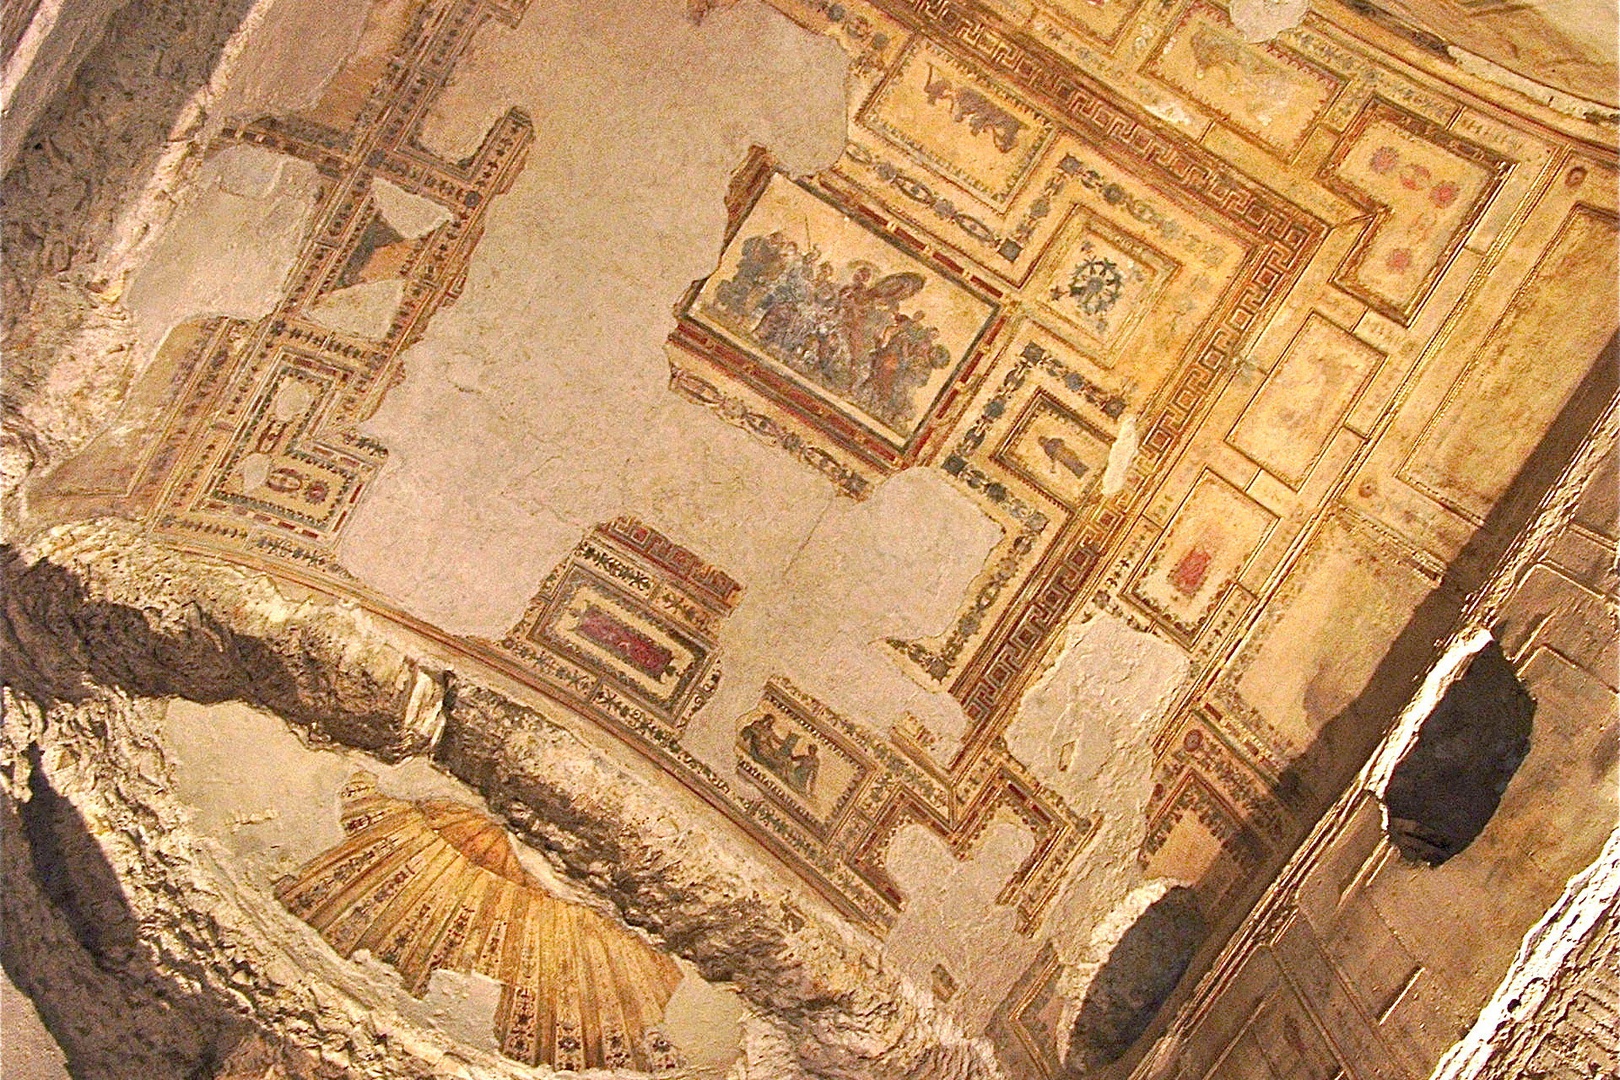 Reserve way in advance to enter in the Domus Aurea, the Golden House of Nero.